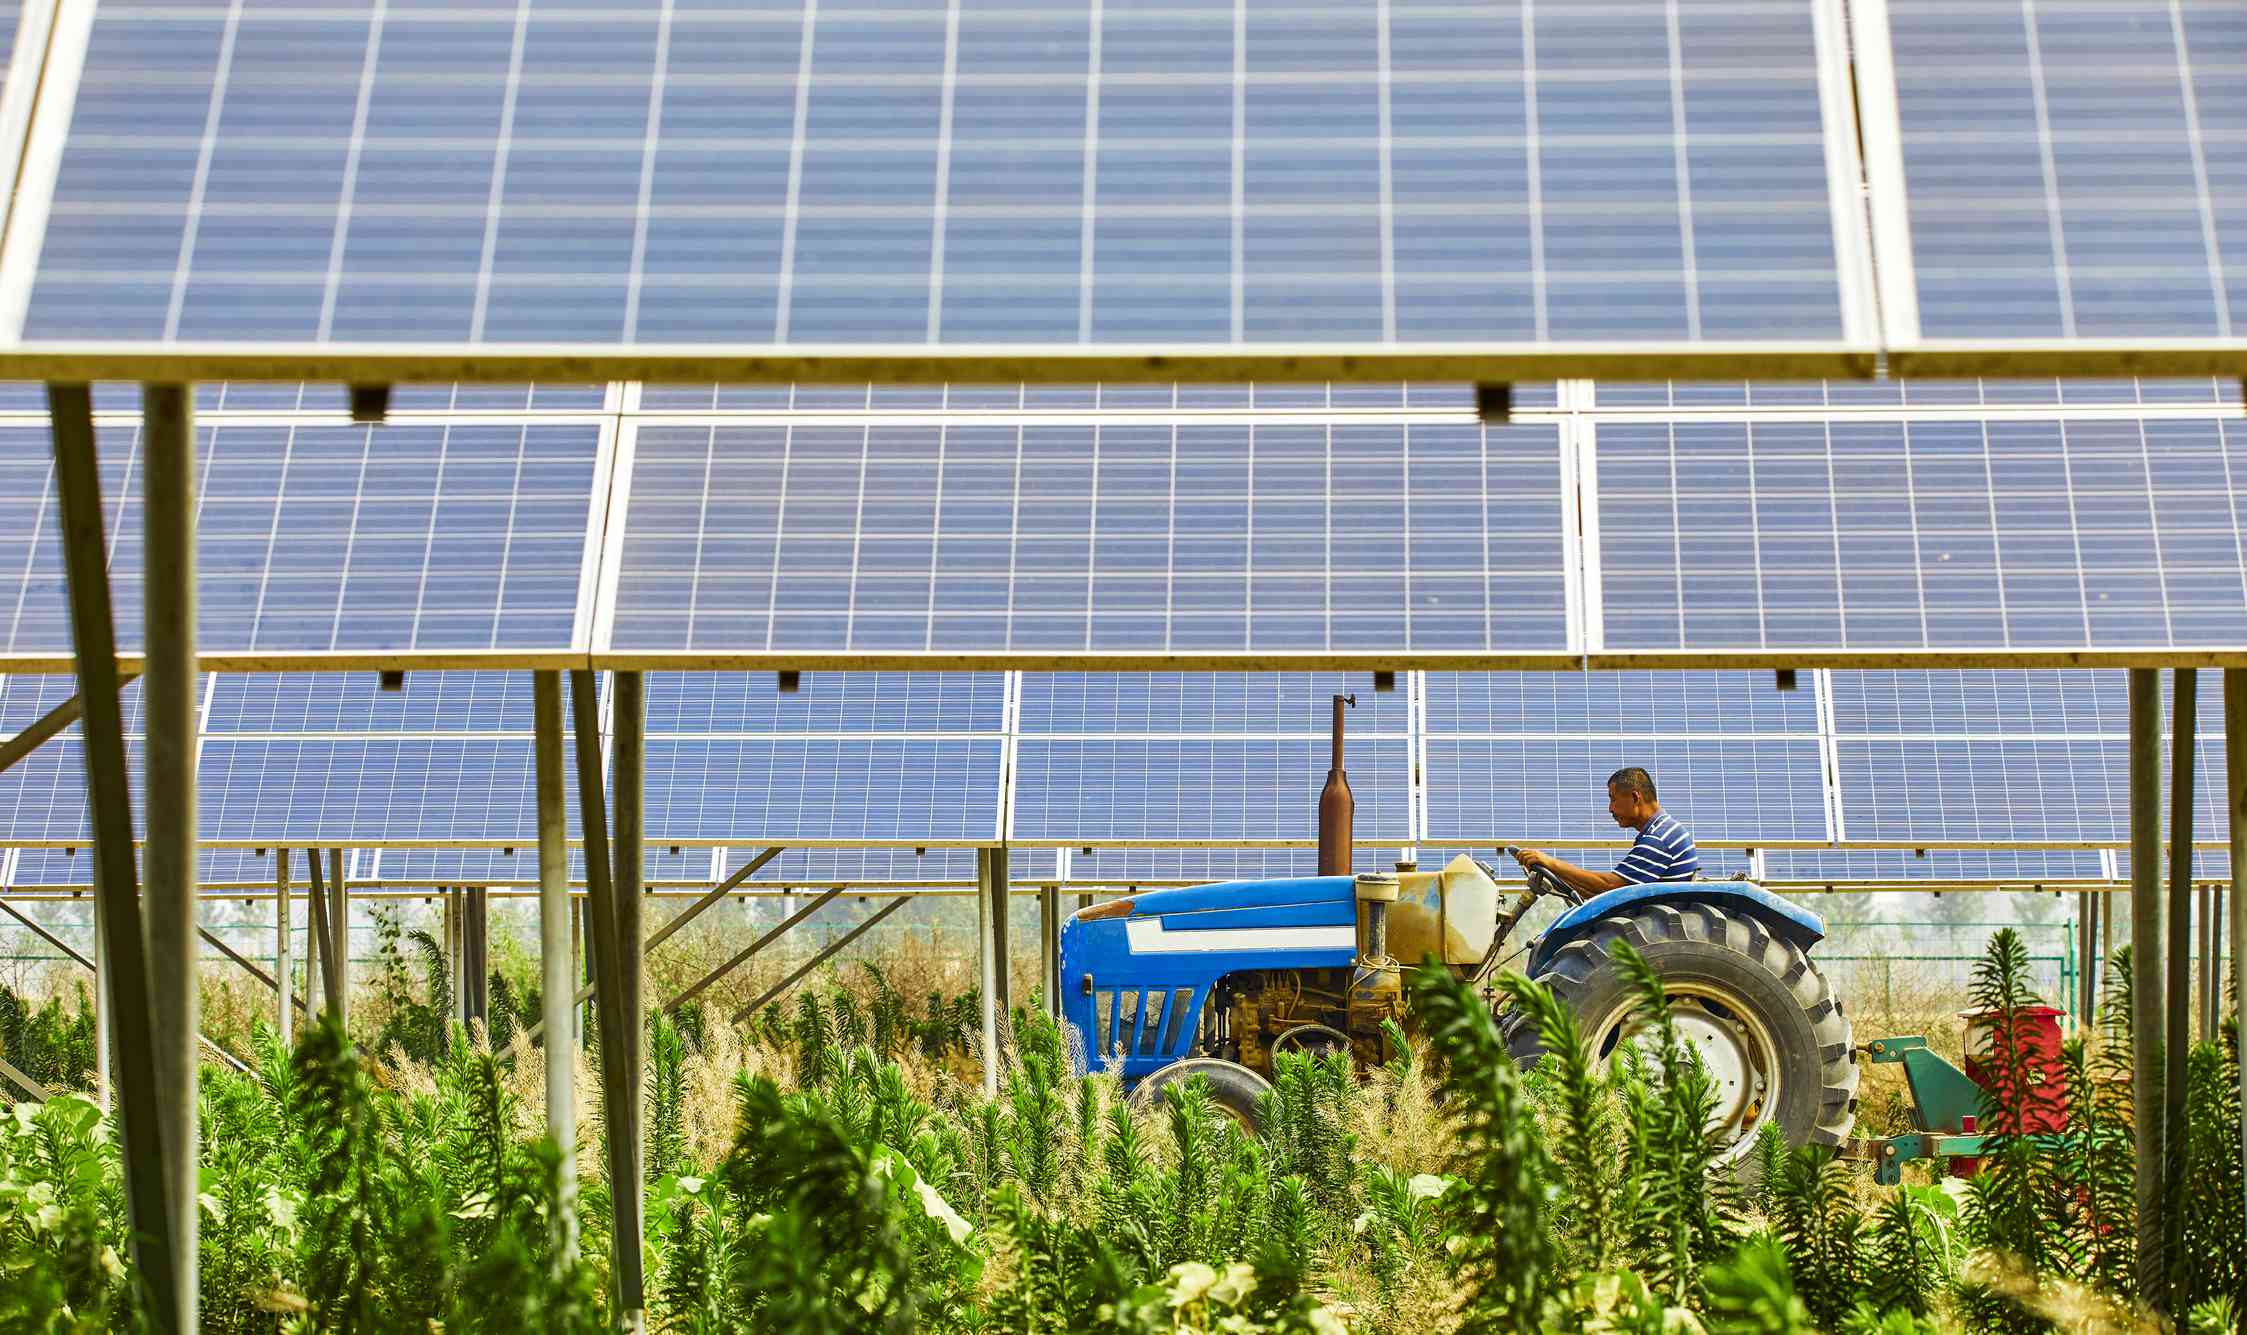 An agricultural producer rides a tractor in front of solar panels.